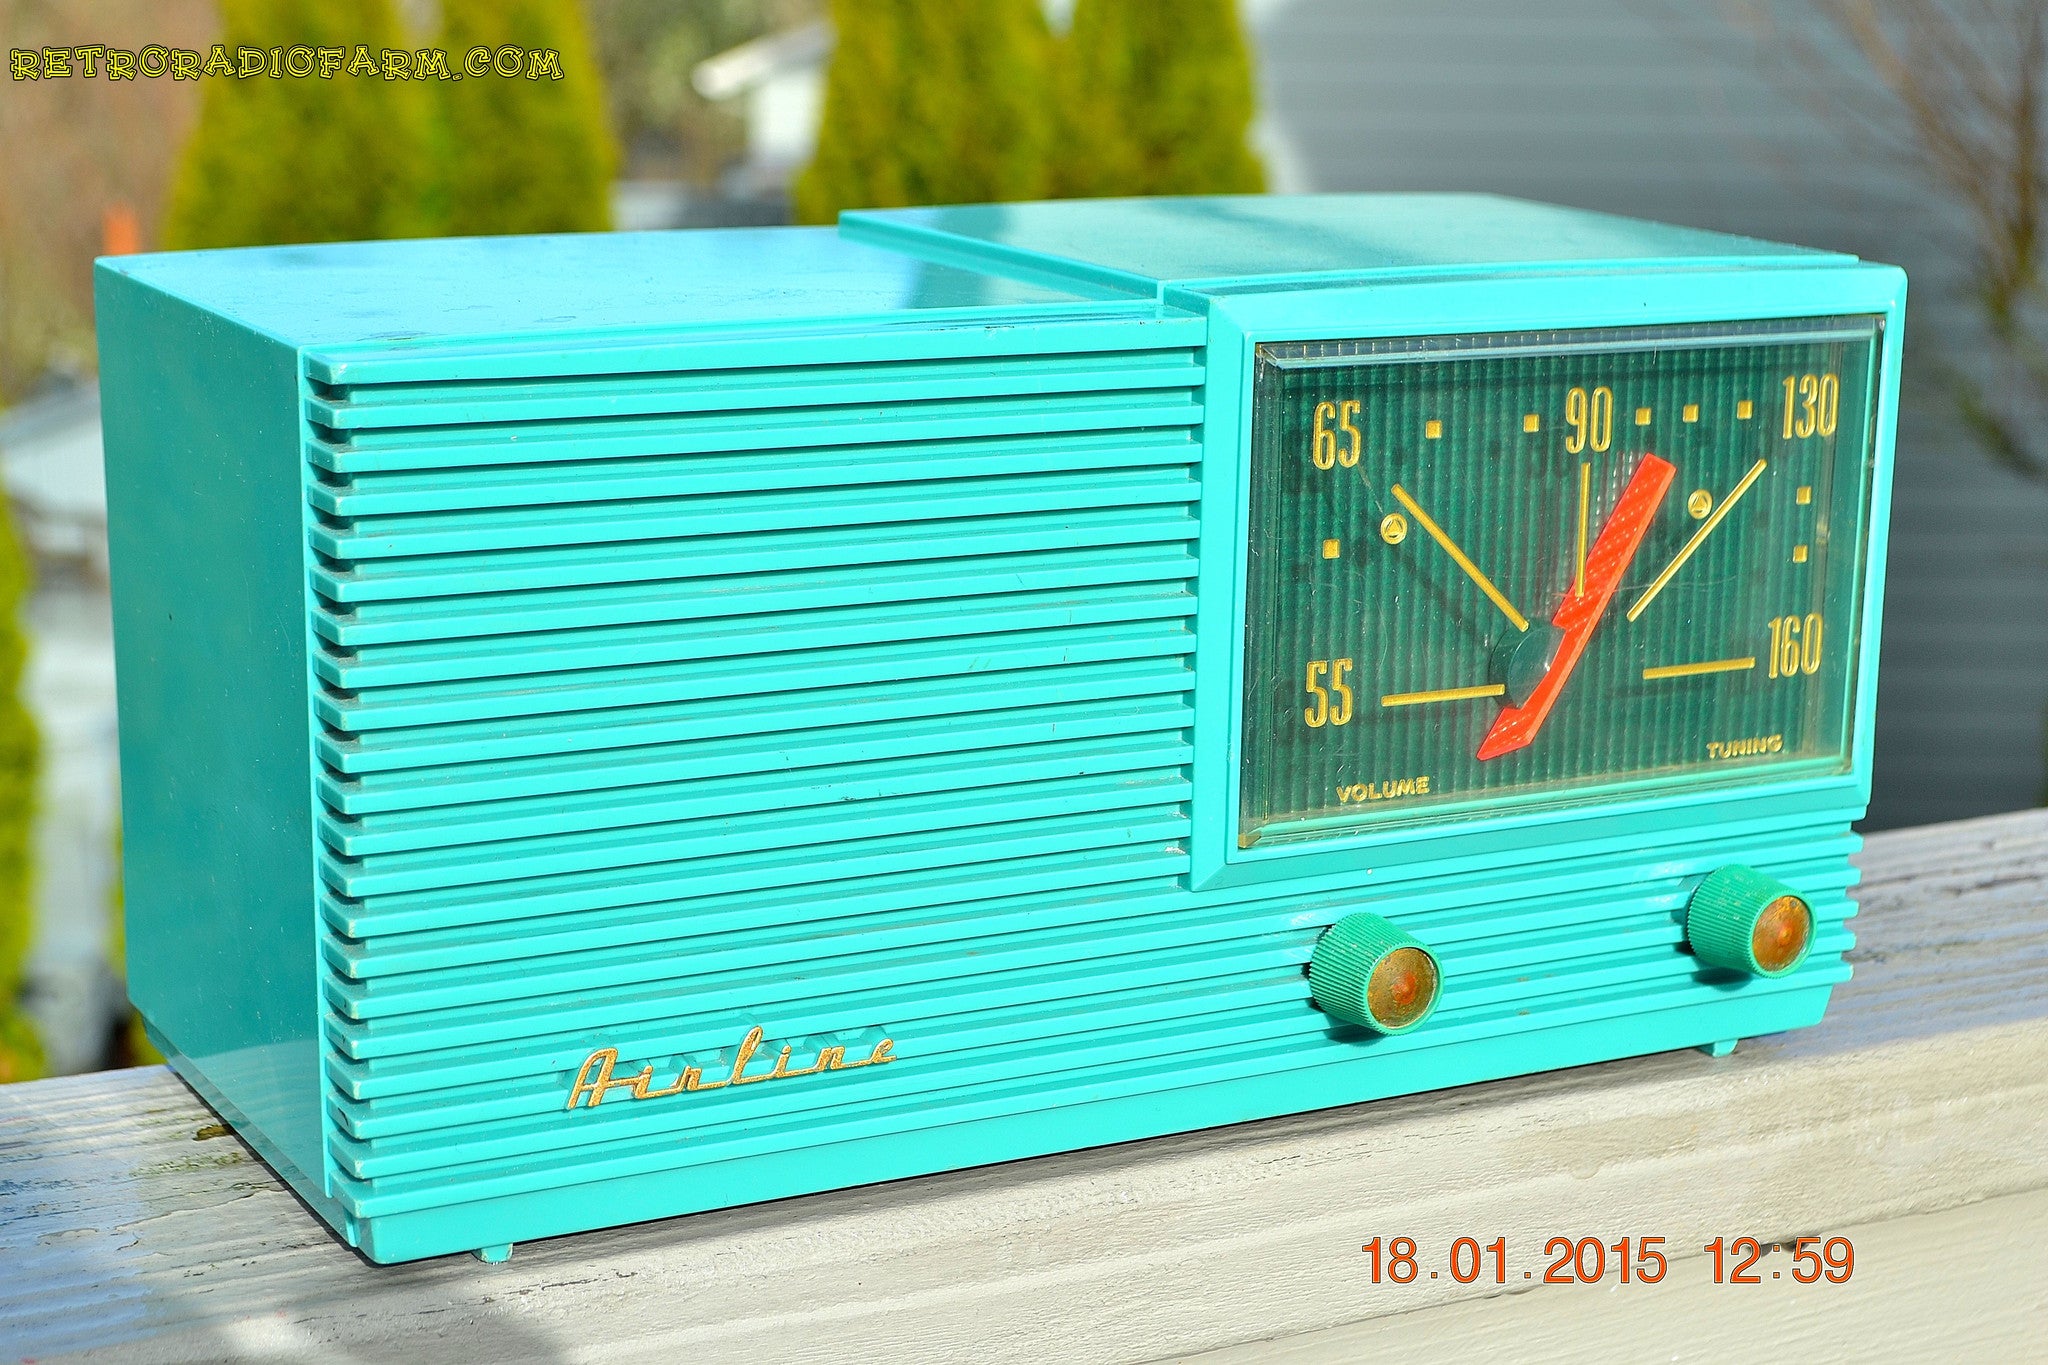 SOLD! - March 22, 2015 - MID CENTURY MARVEL Retro Jetsons Vintage Turquoise 1959 Airline DSE1625A AM Tube Radio Totally Restored! - [product_type} - Airline - Retro Radio Farm